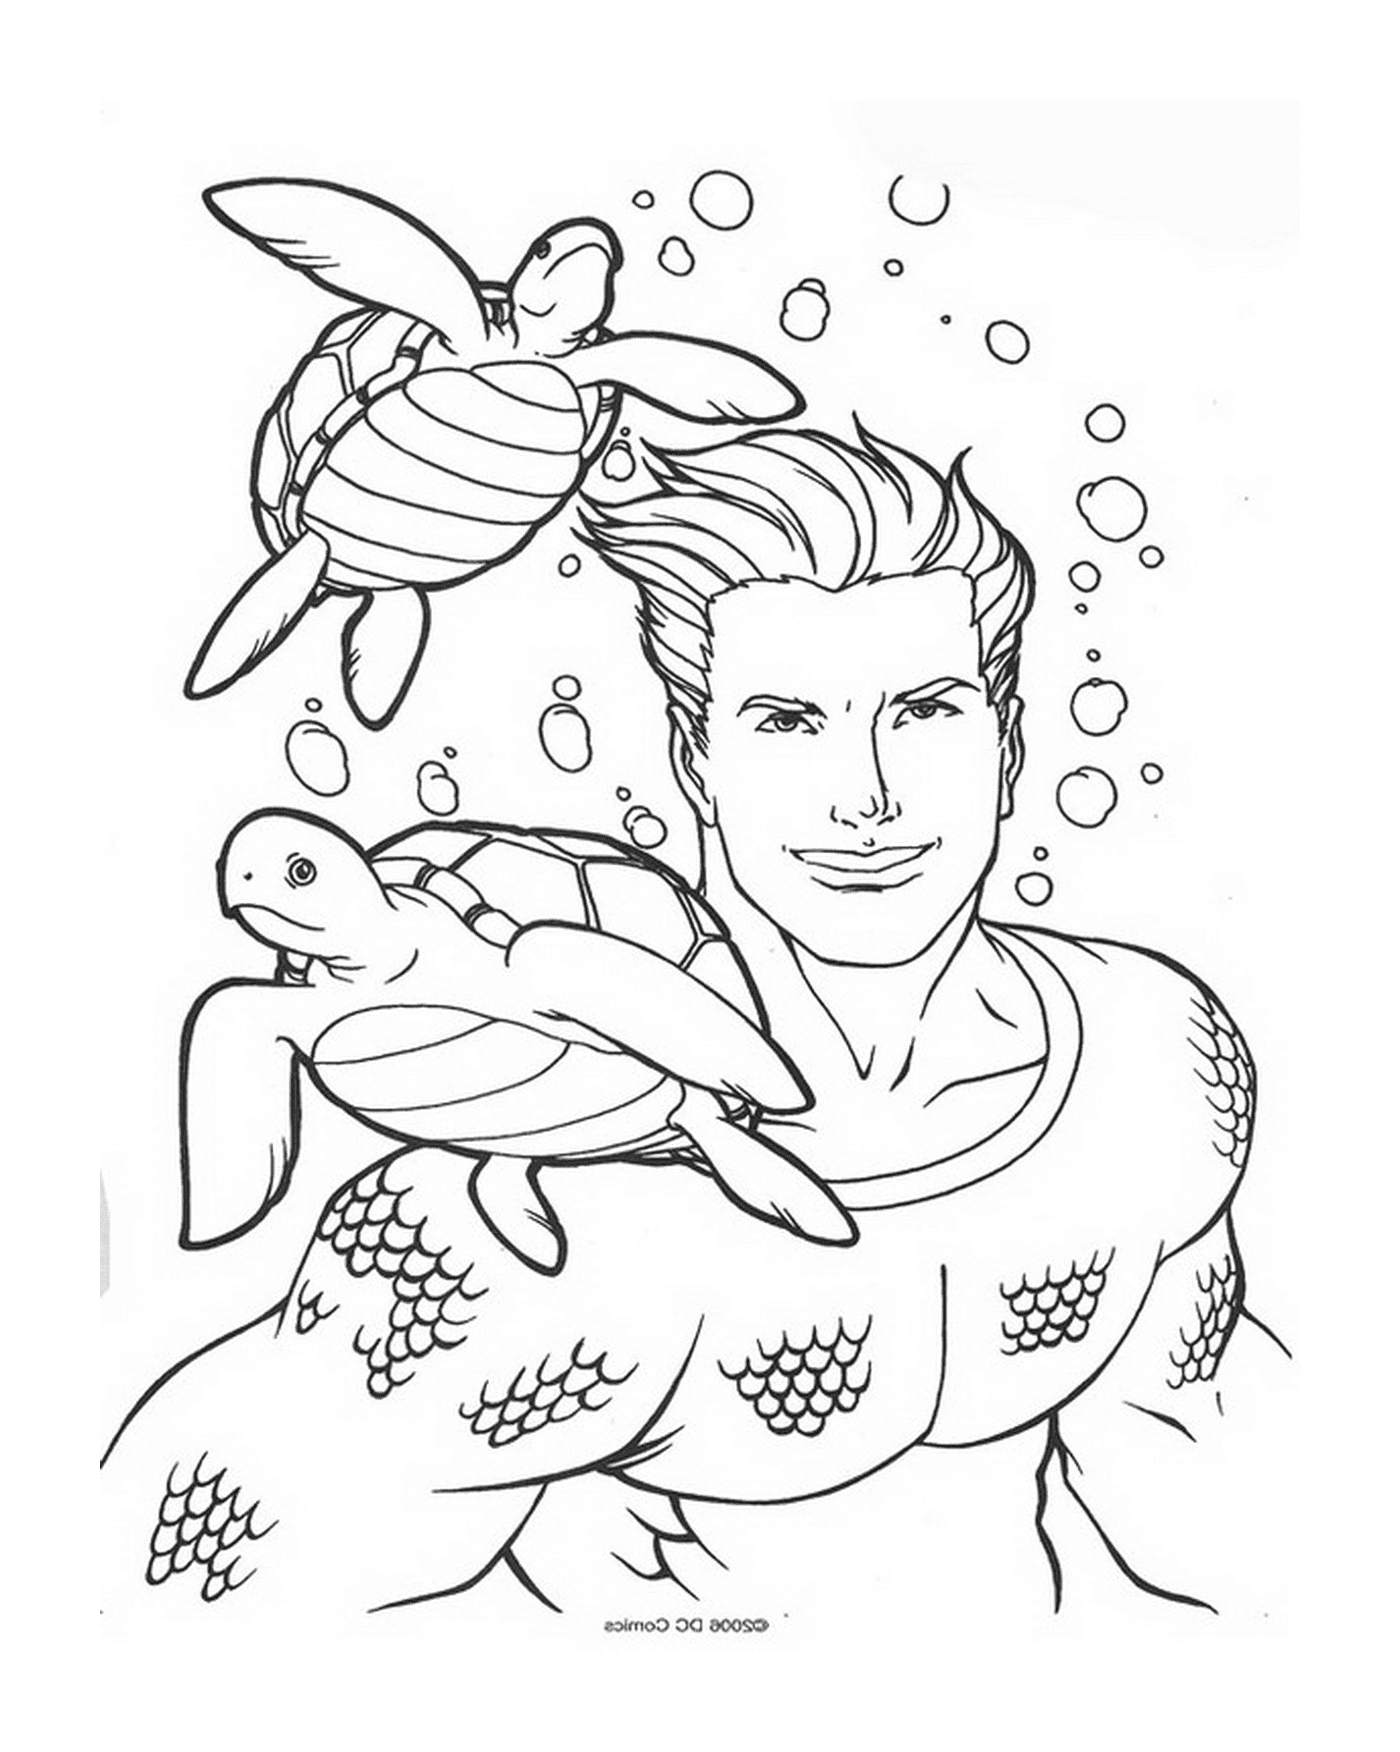  A man and a turtle swimming in the water 